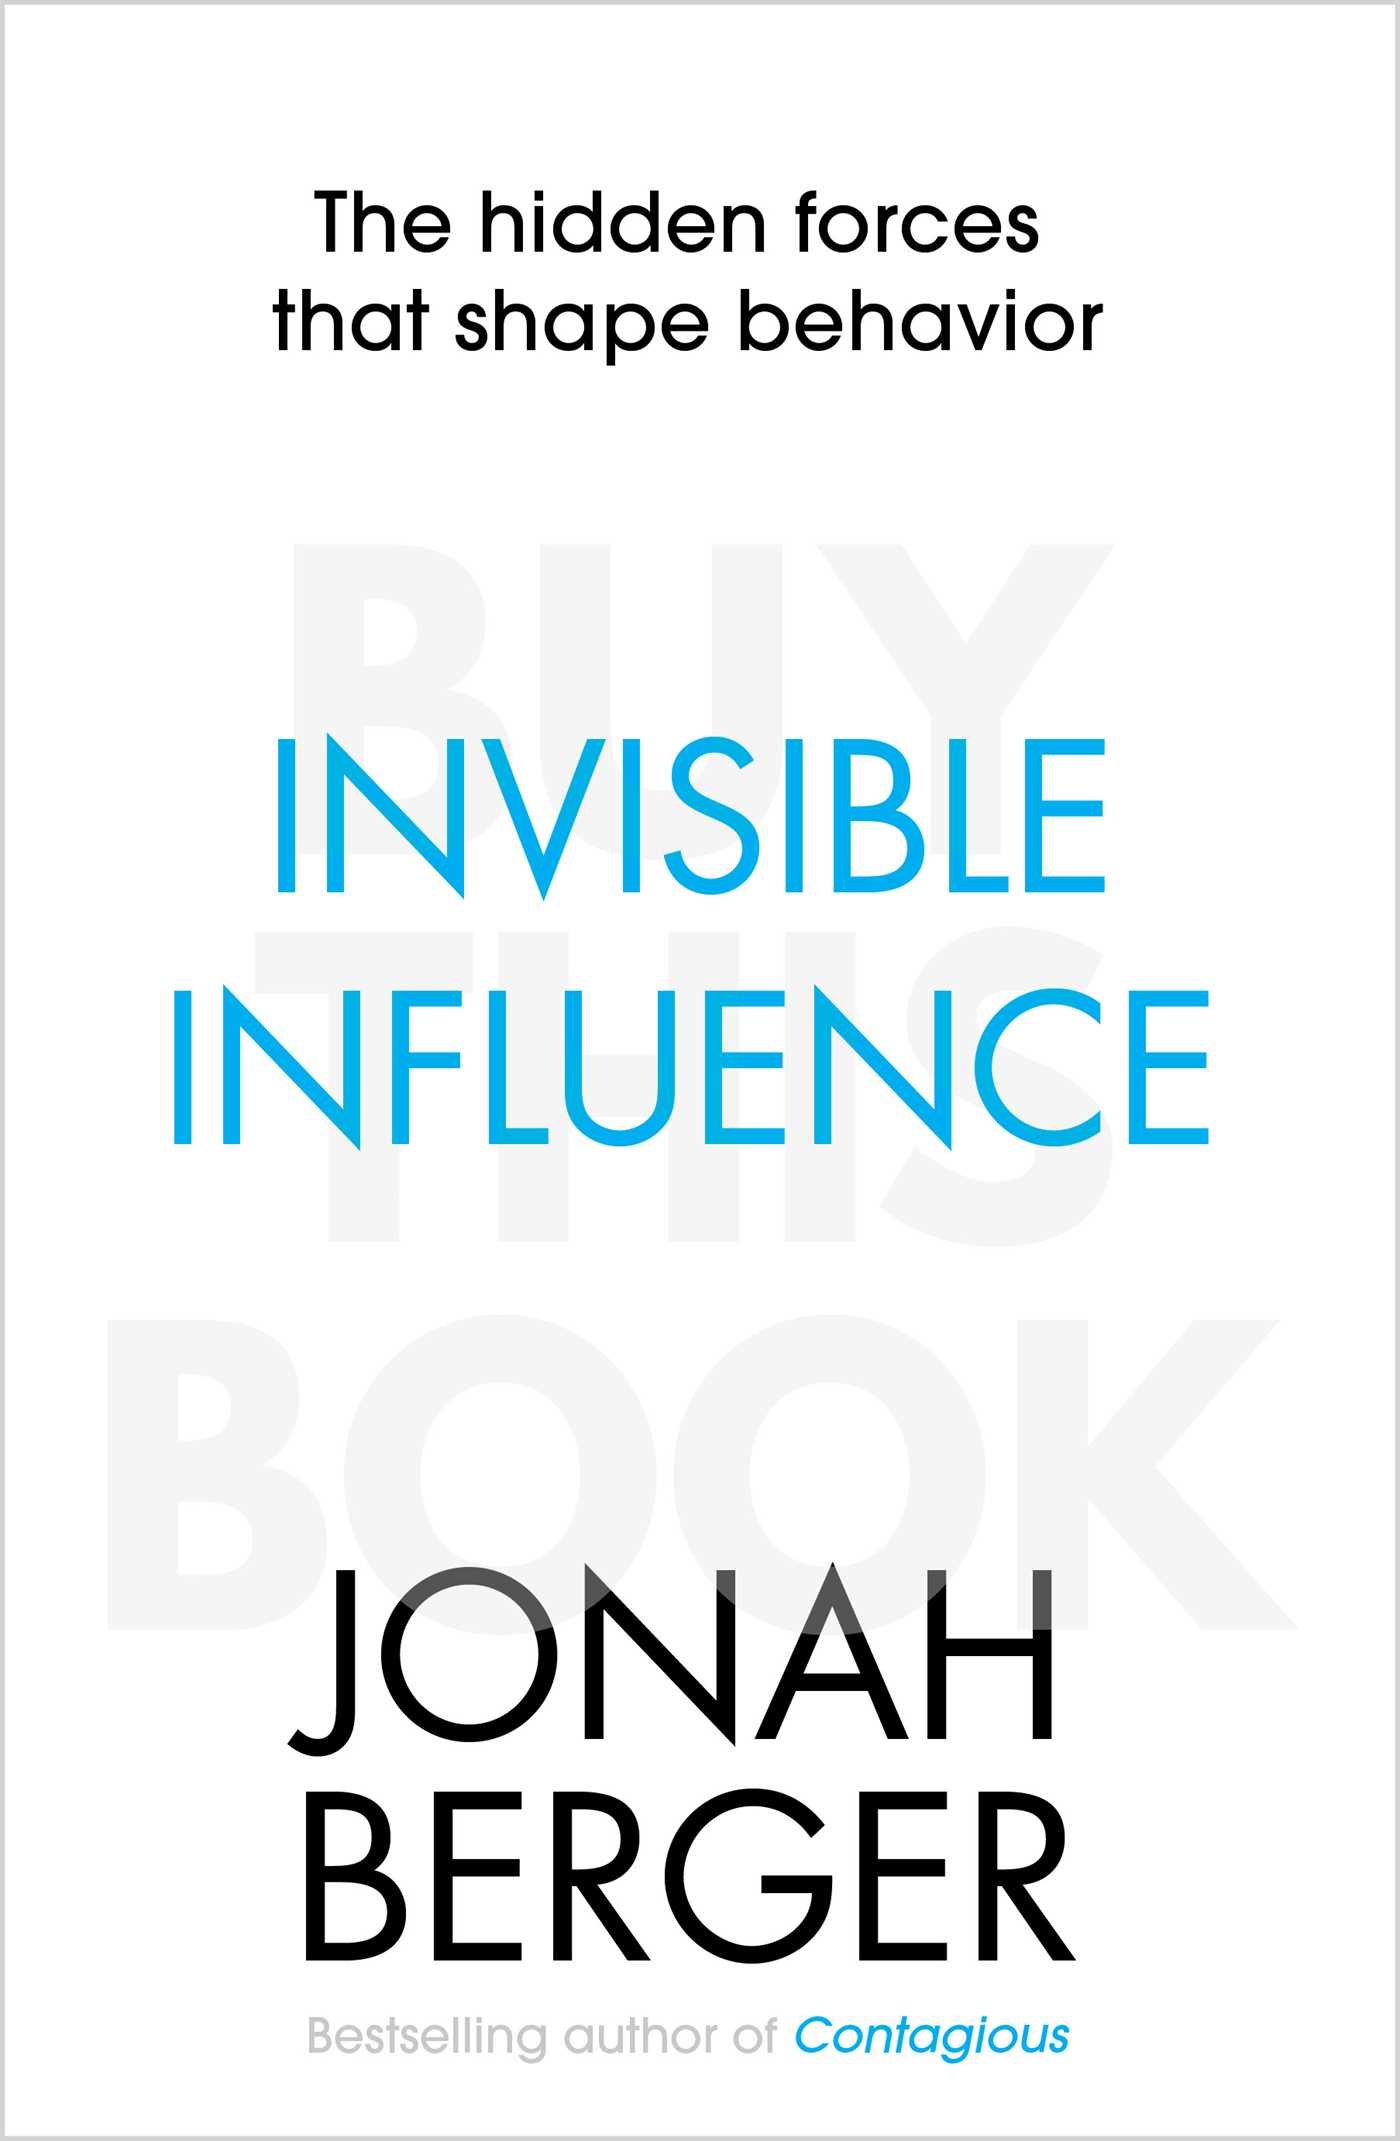 Jonah Berger - Invisible Influence – The Hidden Forces that Shape Behavior